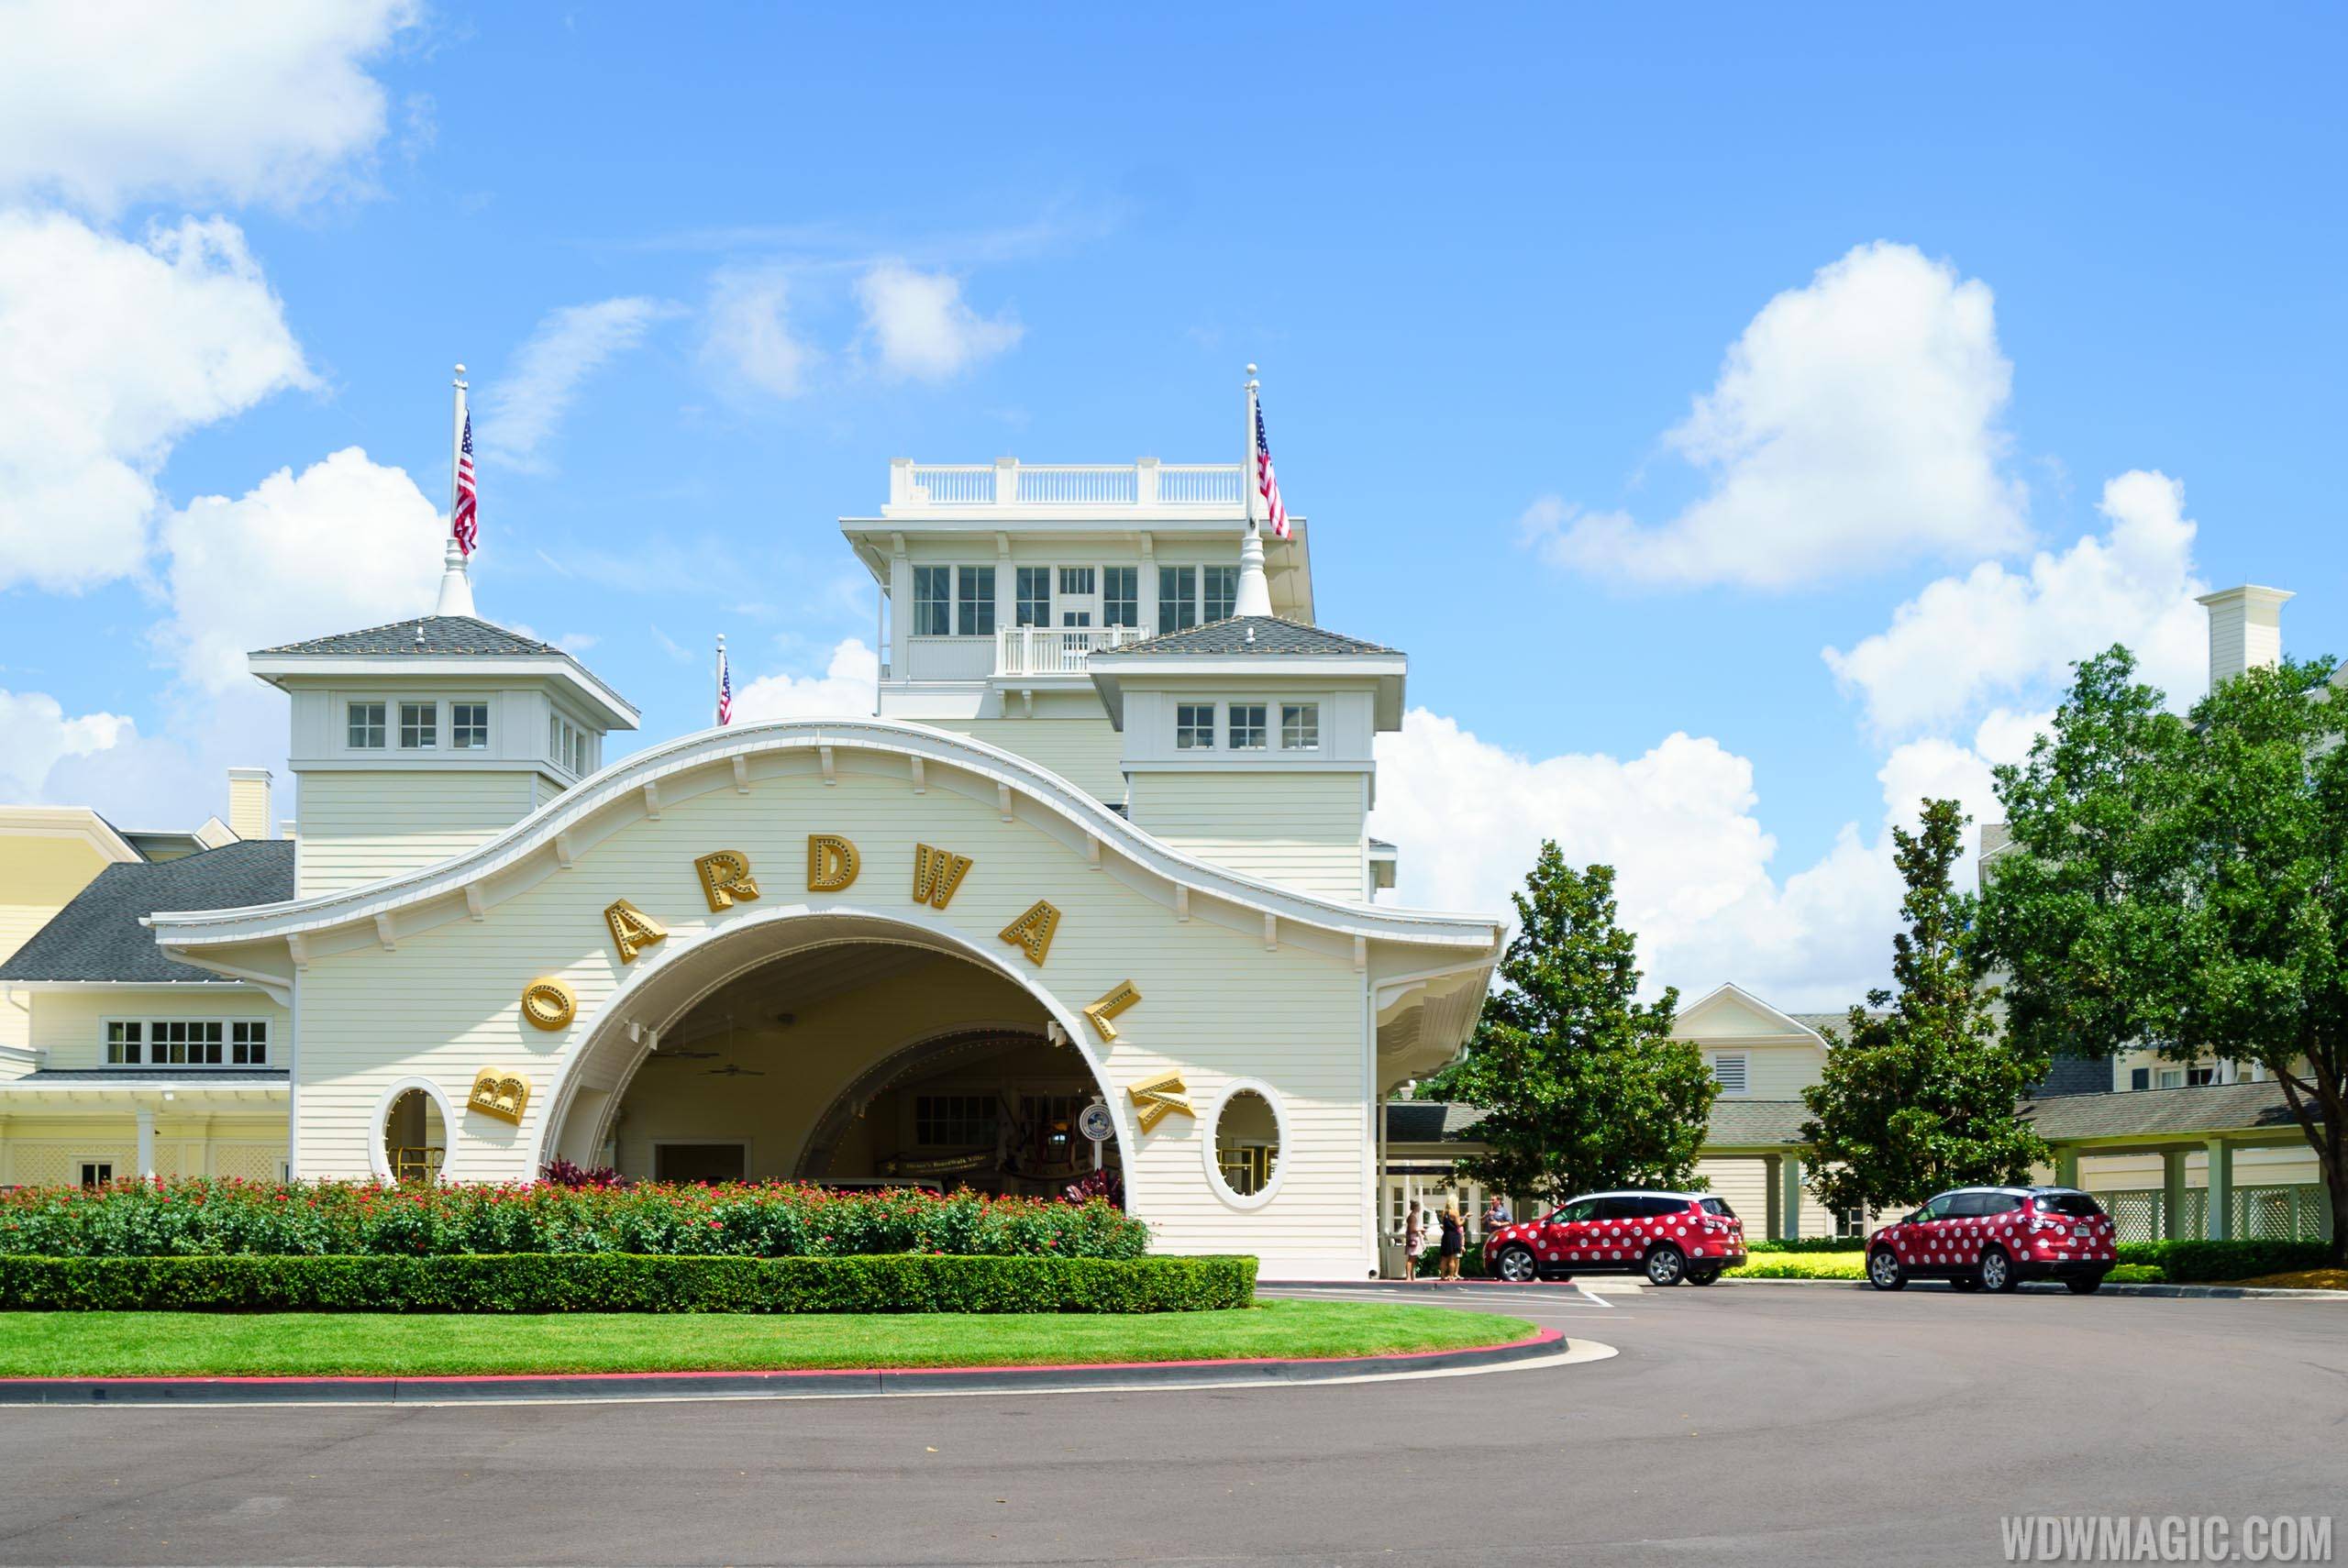 Disney's BoardWalk Inn will receive enhancements that are expected to open in 2023